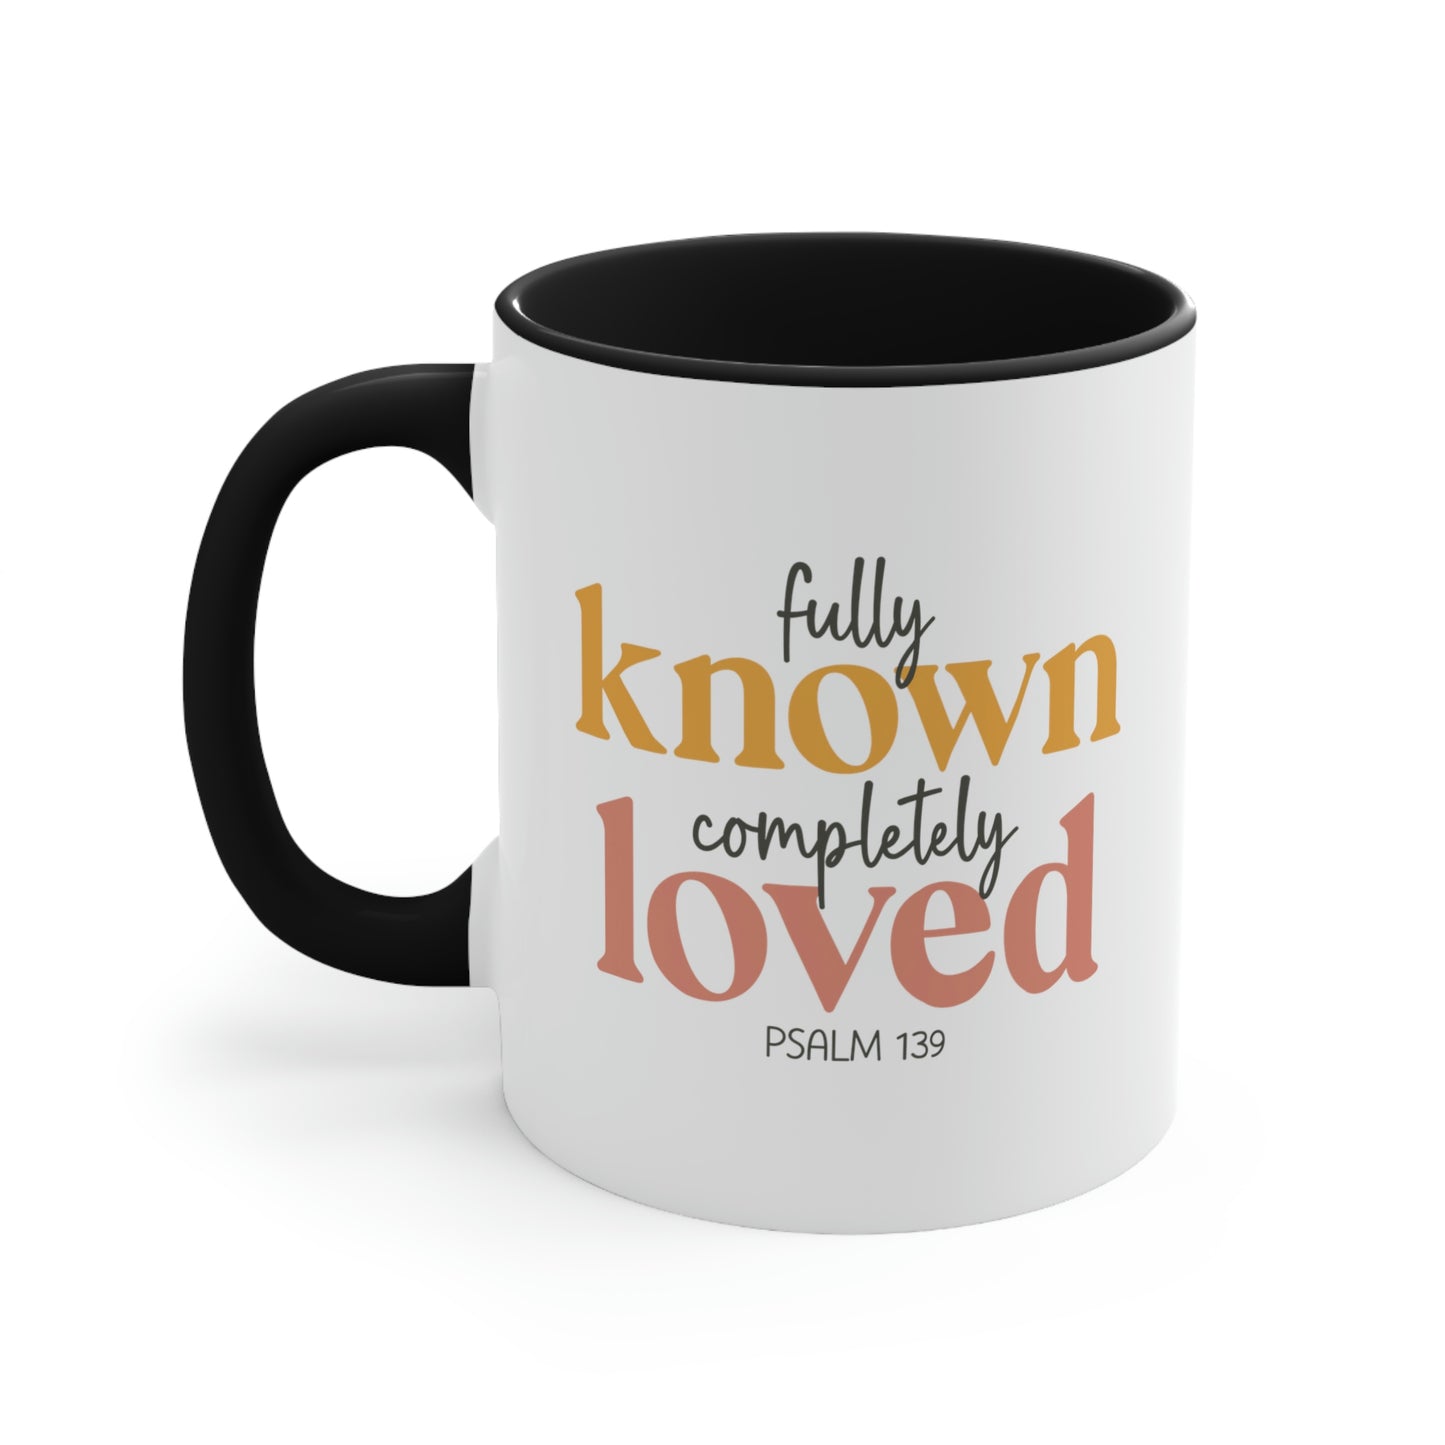 Fully Known, Completely Loved Accent Mug with Black Interior and Handle